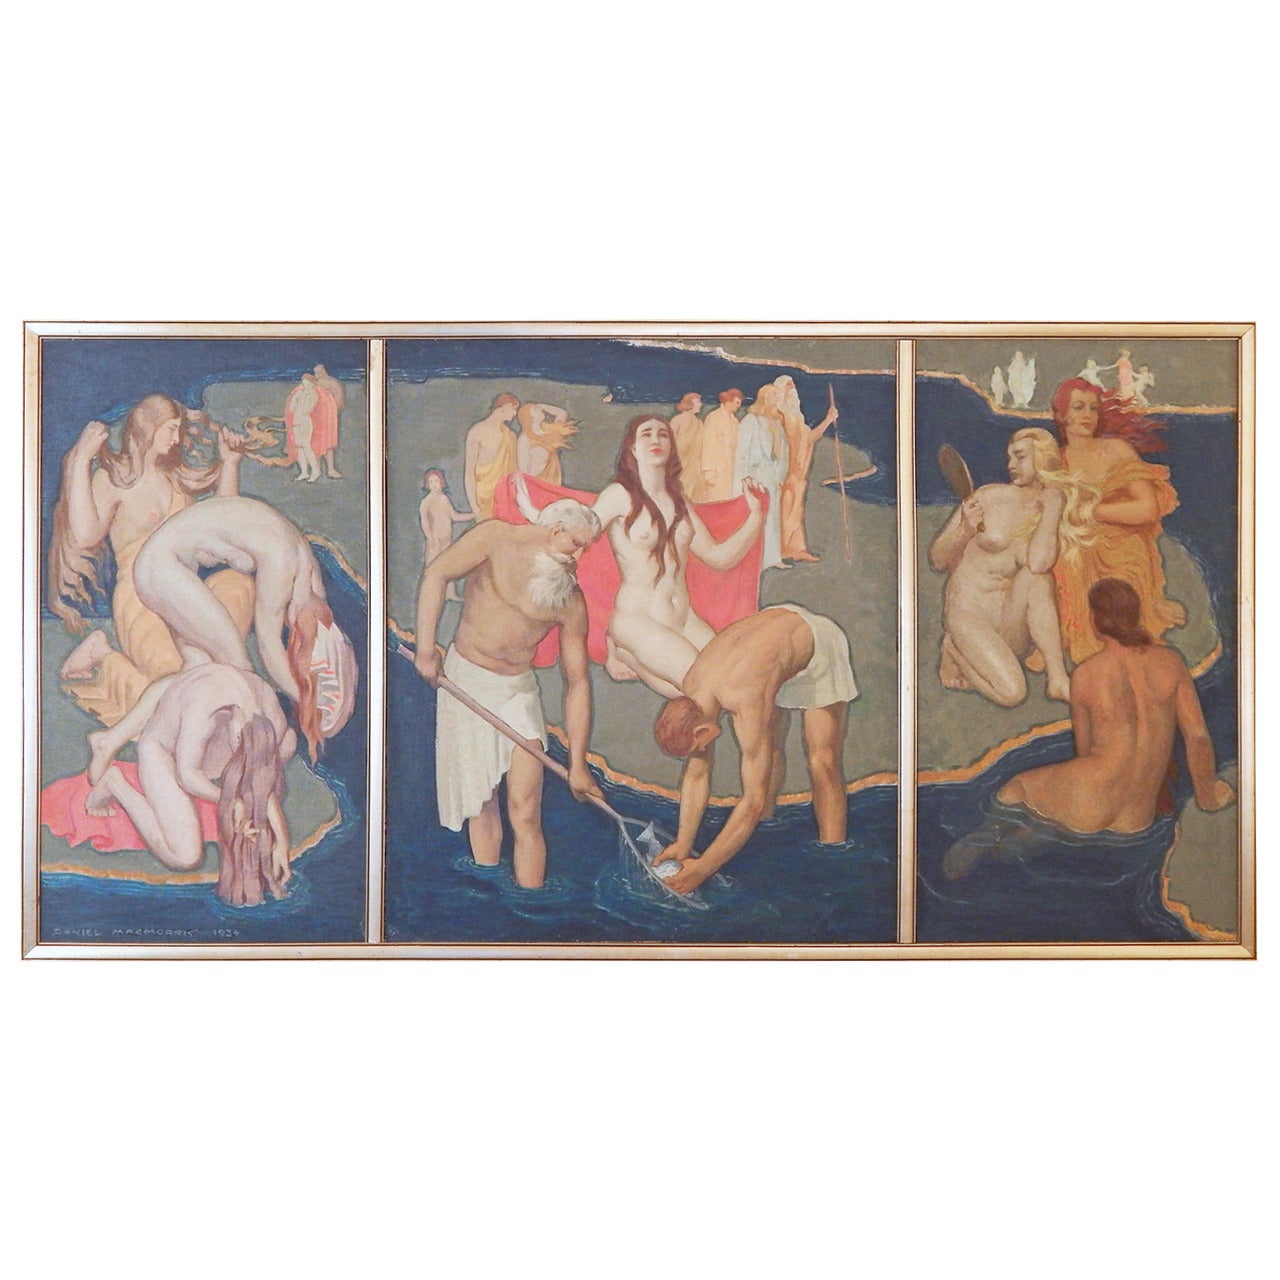 "Parable, " Large Art Deco Triptych Mural with Nudes by MacMorris, 1934